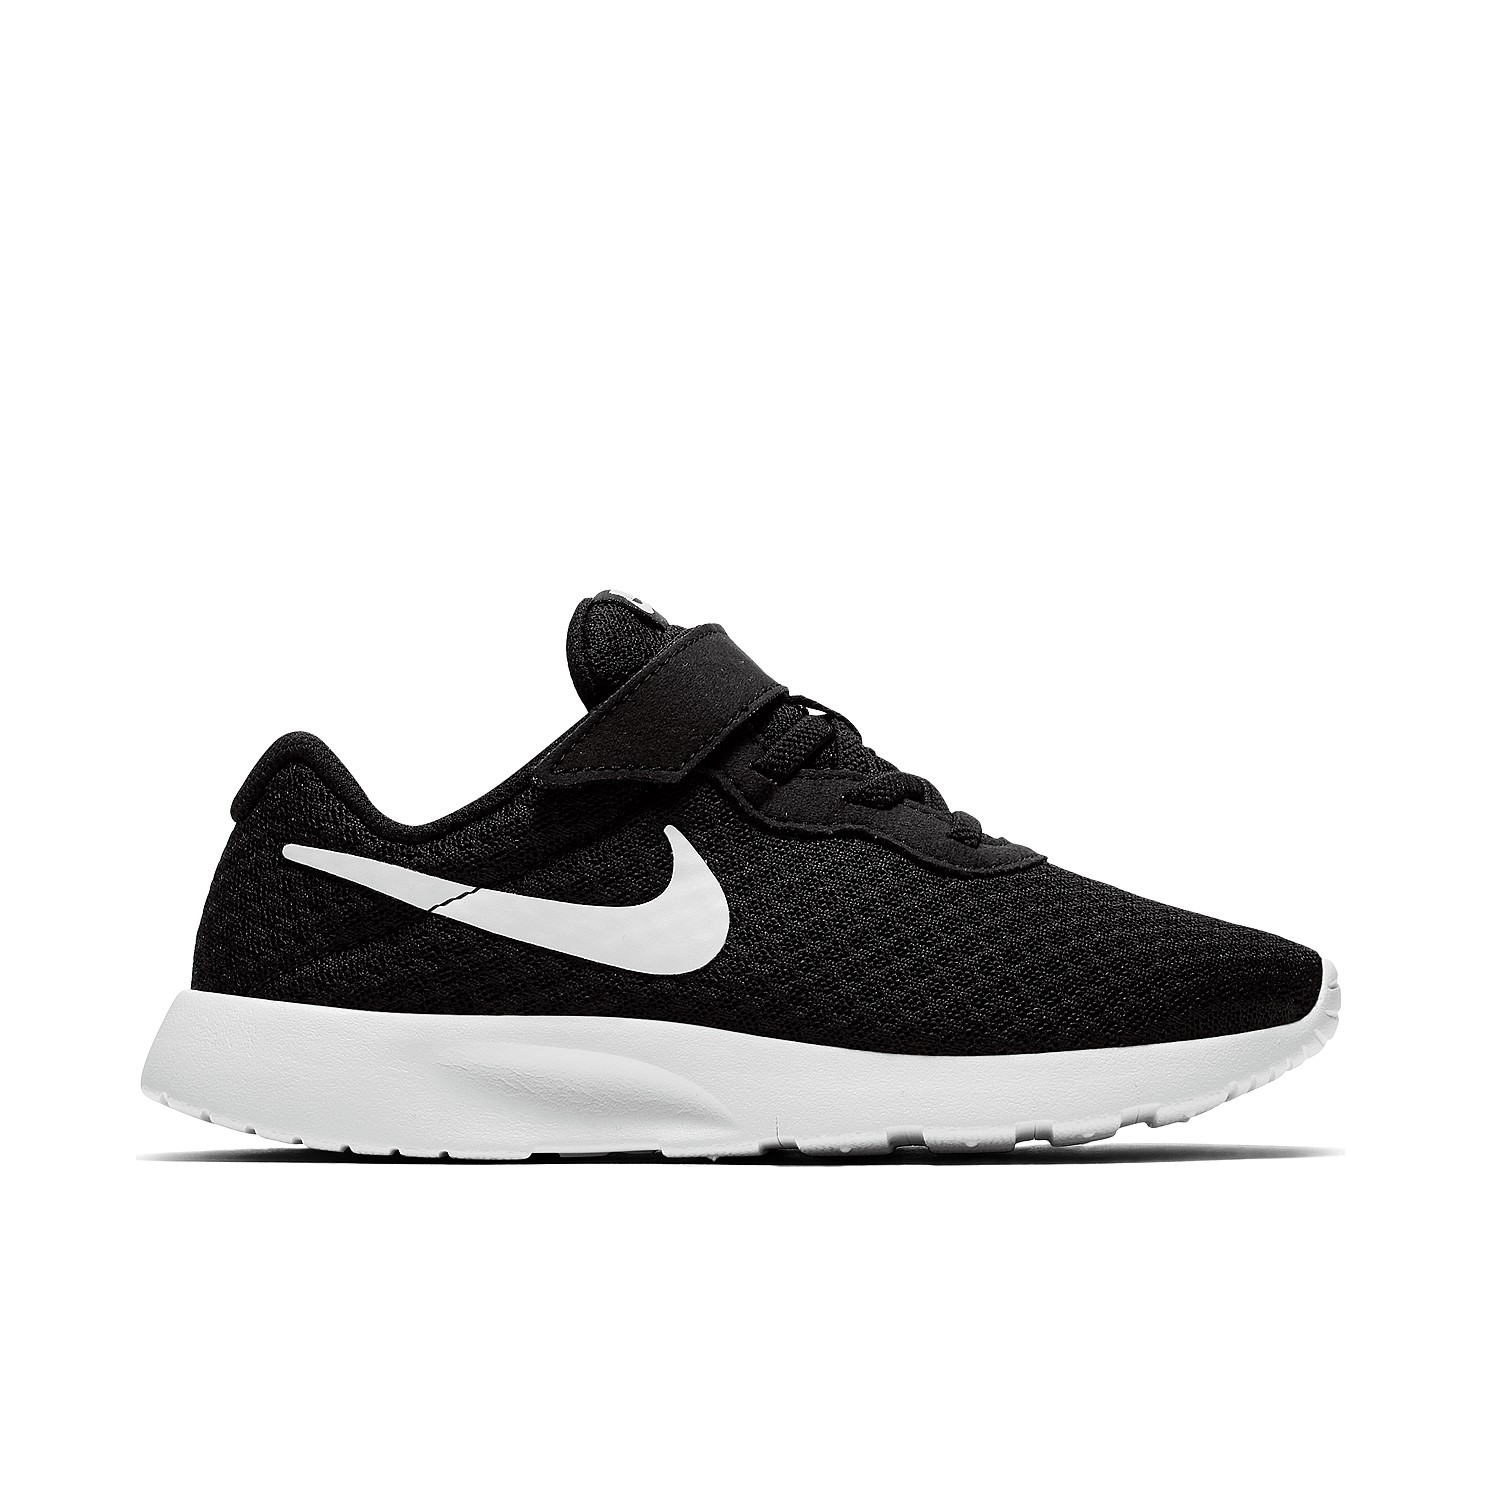 nike youth shoes nz online -